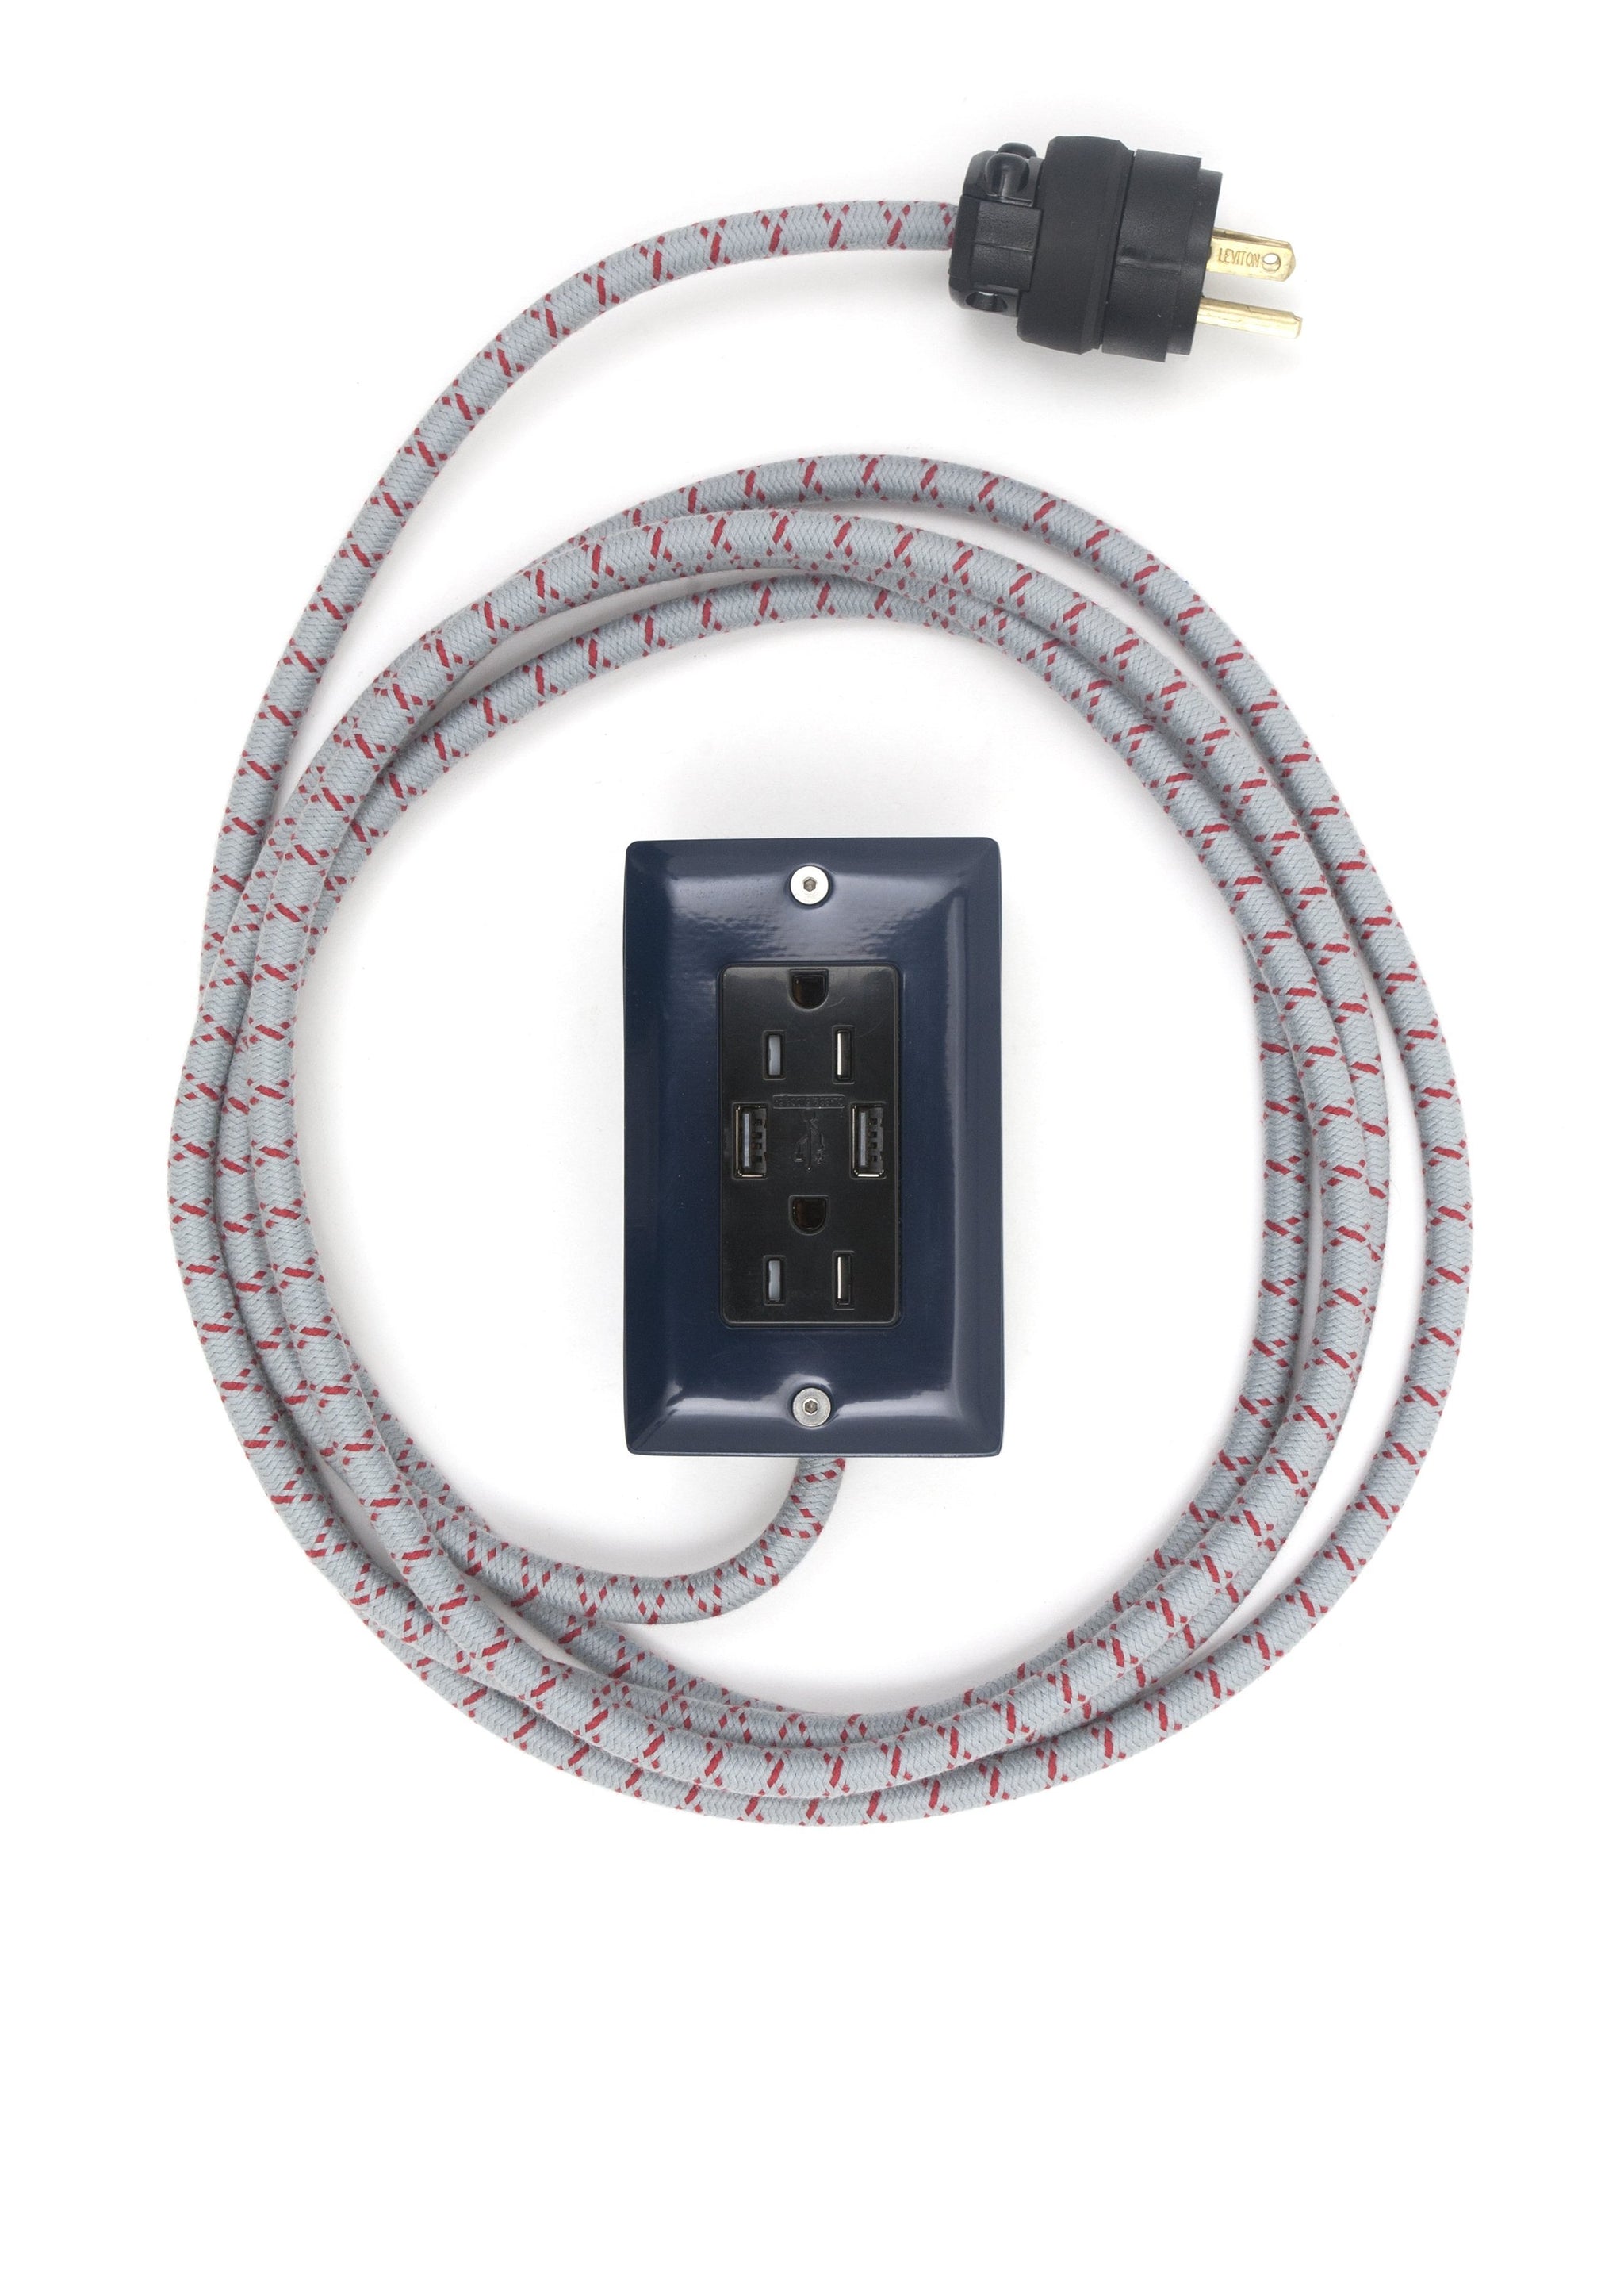 The First Smart Chip Extension Cord - 12' Extō Dual-USB, Dual-Outlet - Navy Blue